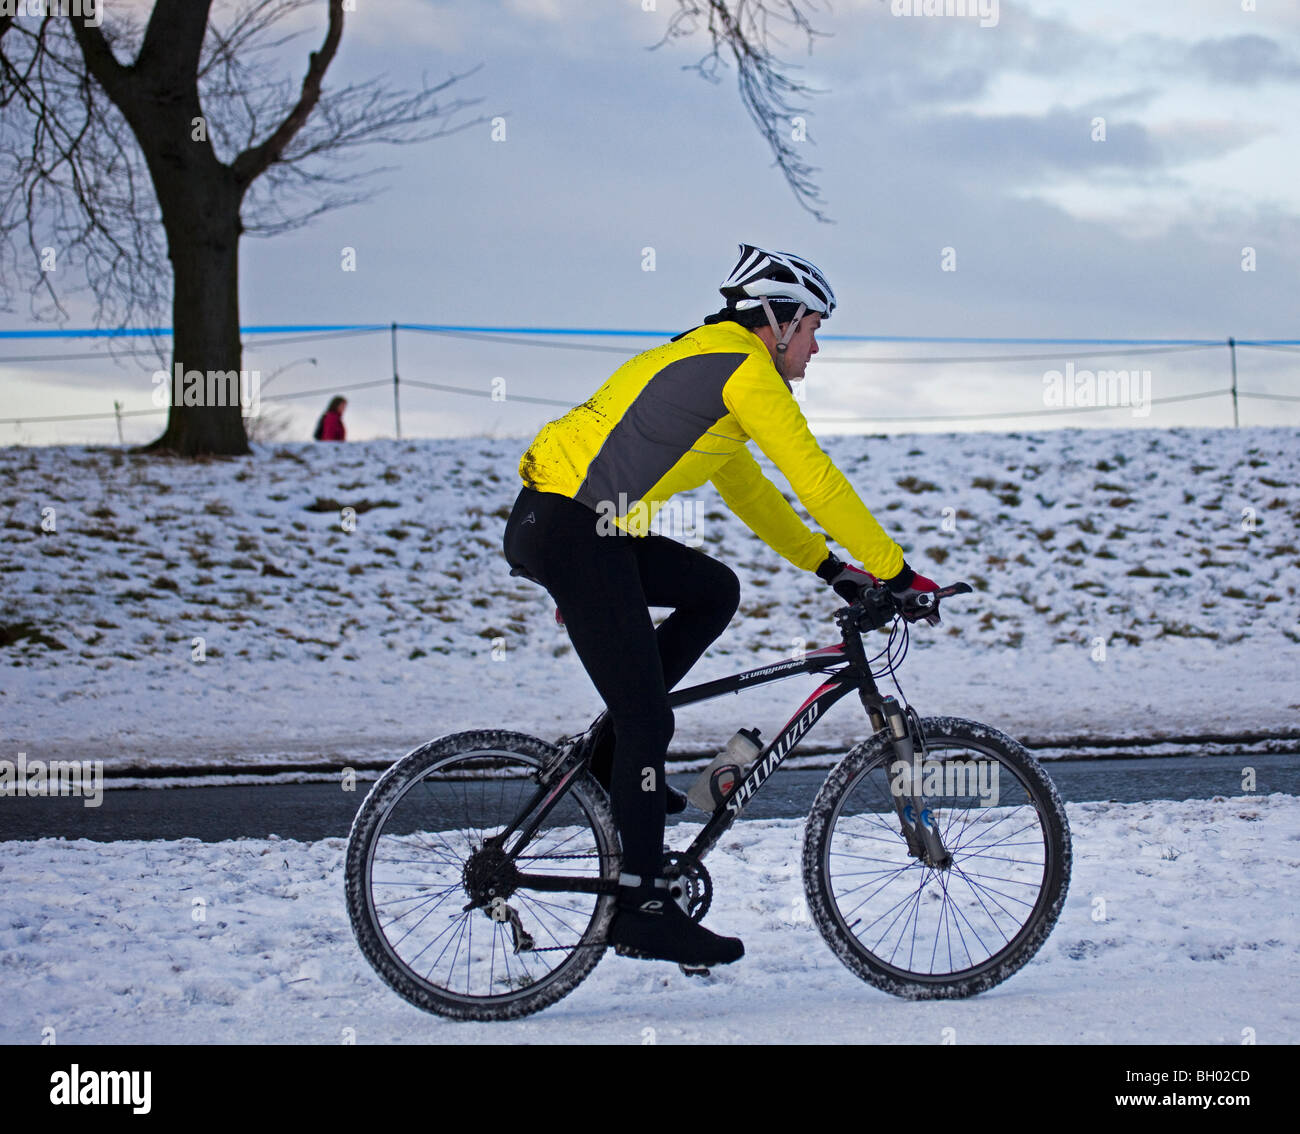 Cyclist with helmet safety gear riding bike on snow Stock Photo